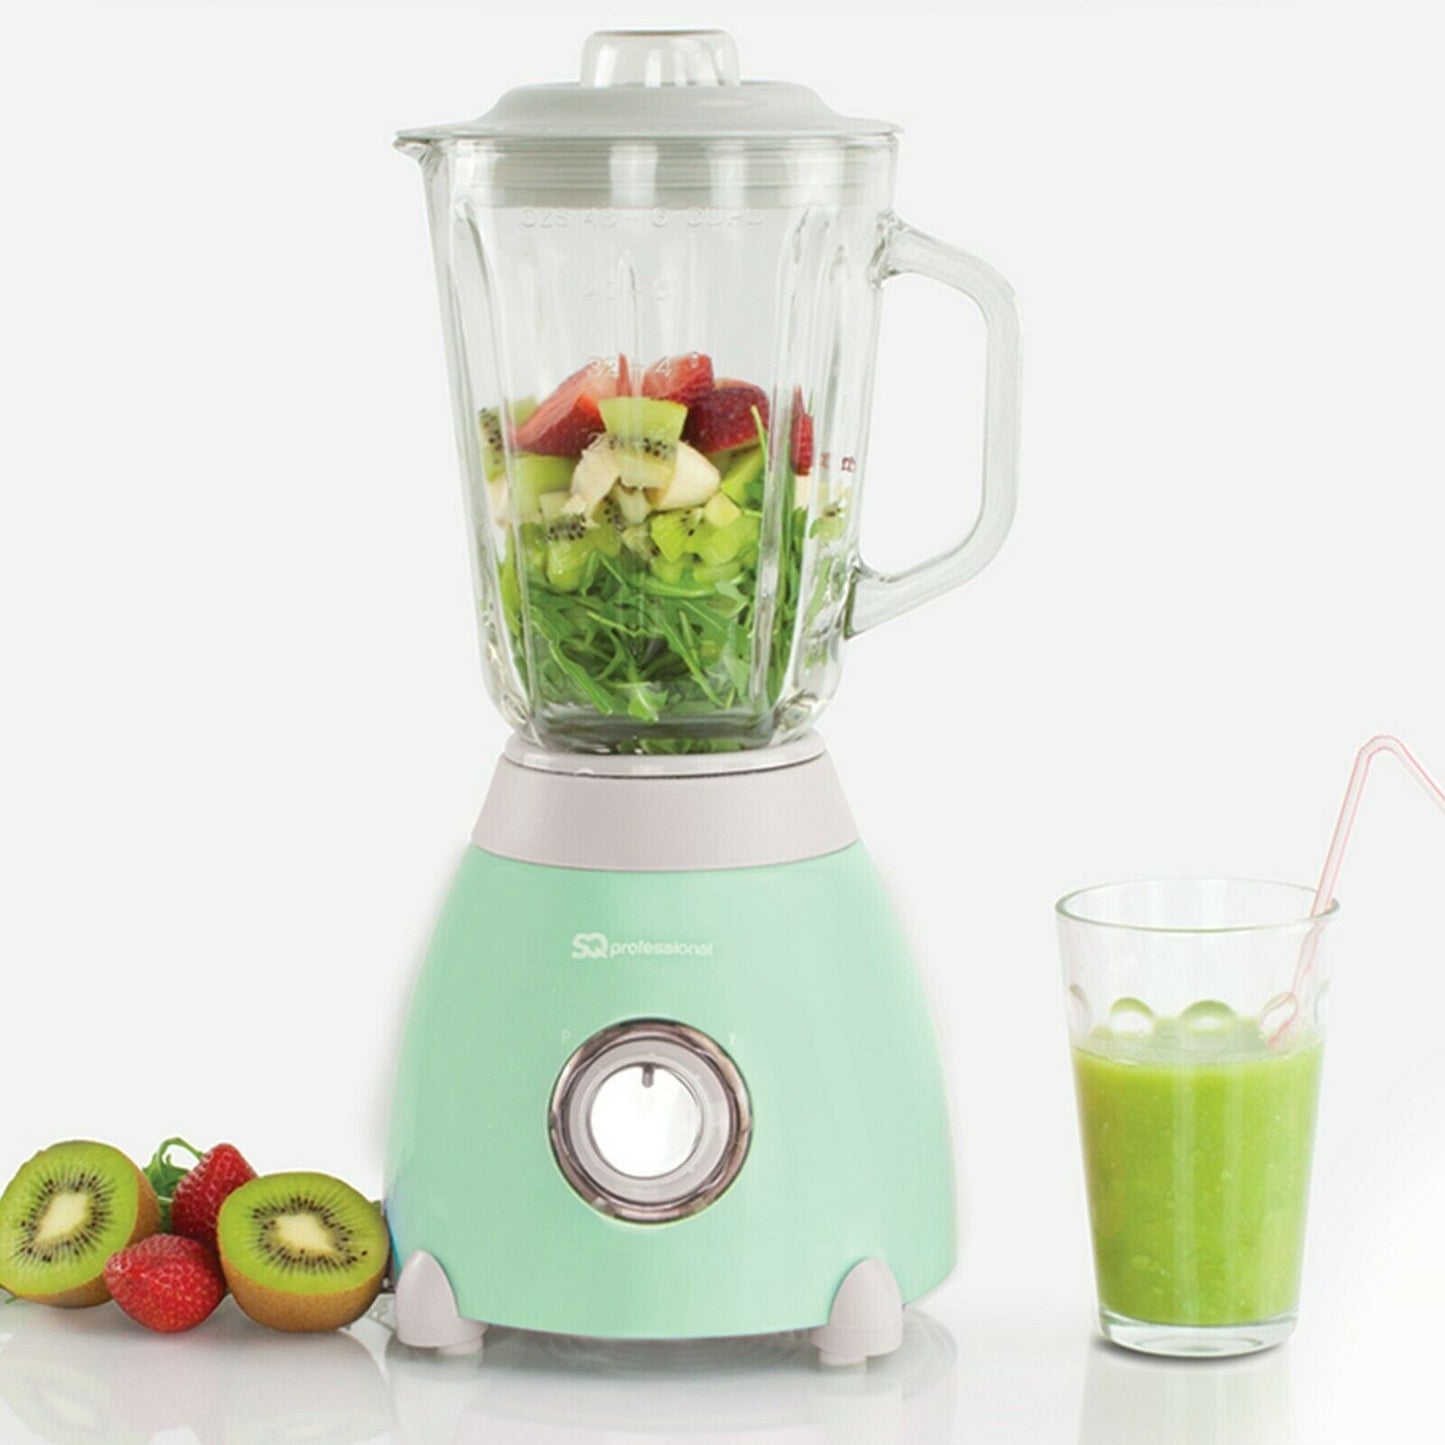 Green and Glass Jug Food Blender & Grinder 500W SQ Professional with 100g Seafoam (7282)